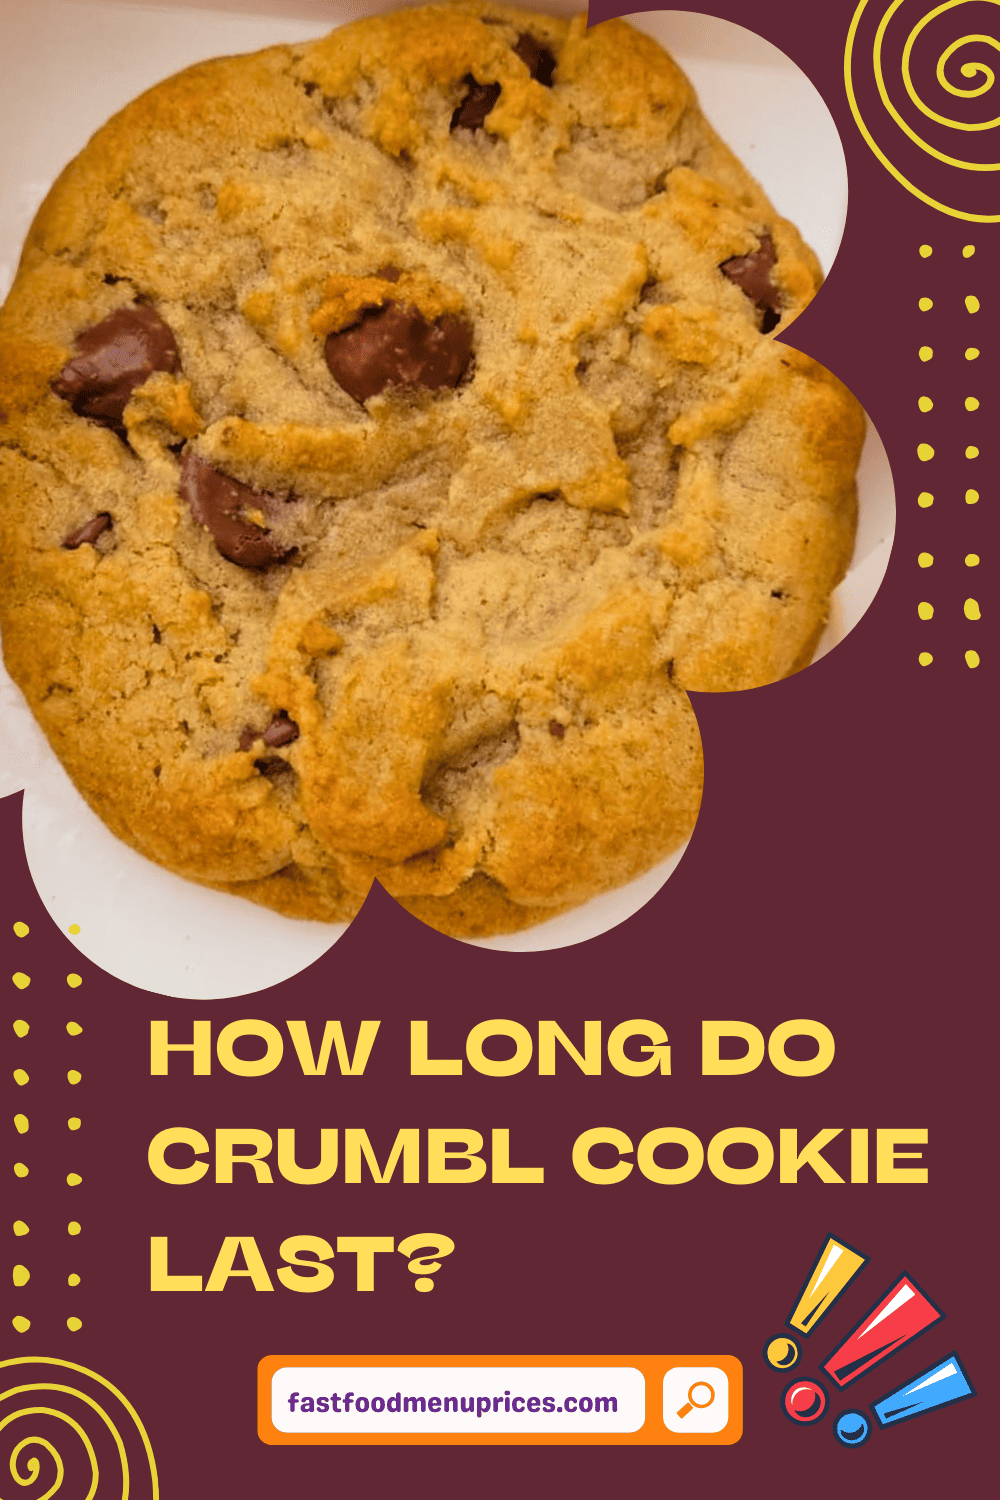 How long do crumble cookies last? Is there a secret menu at Raising Cane's?